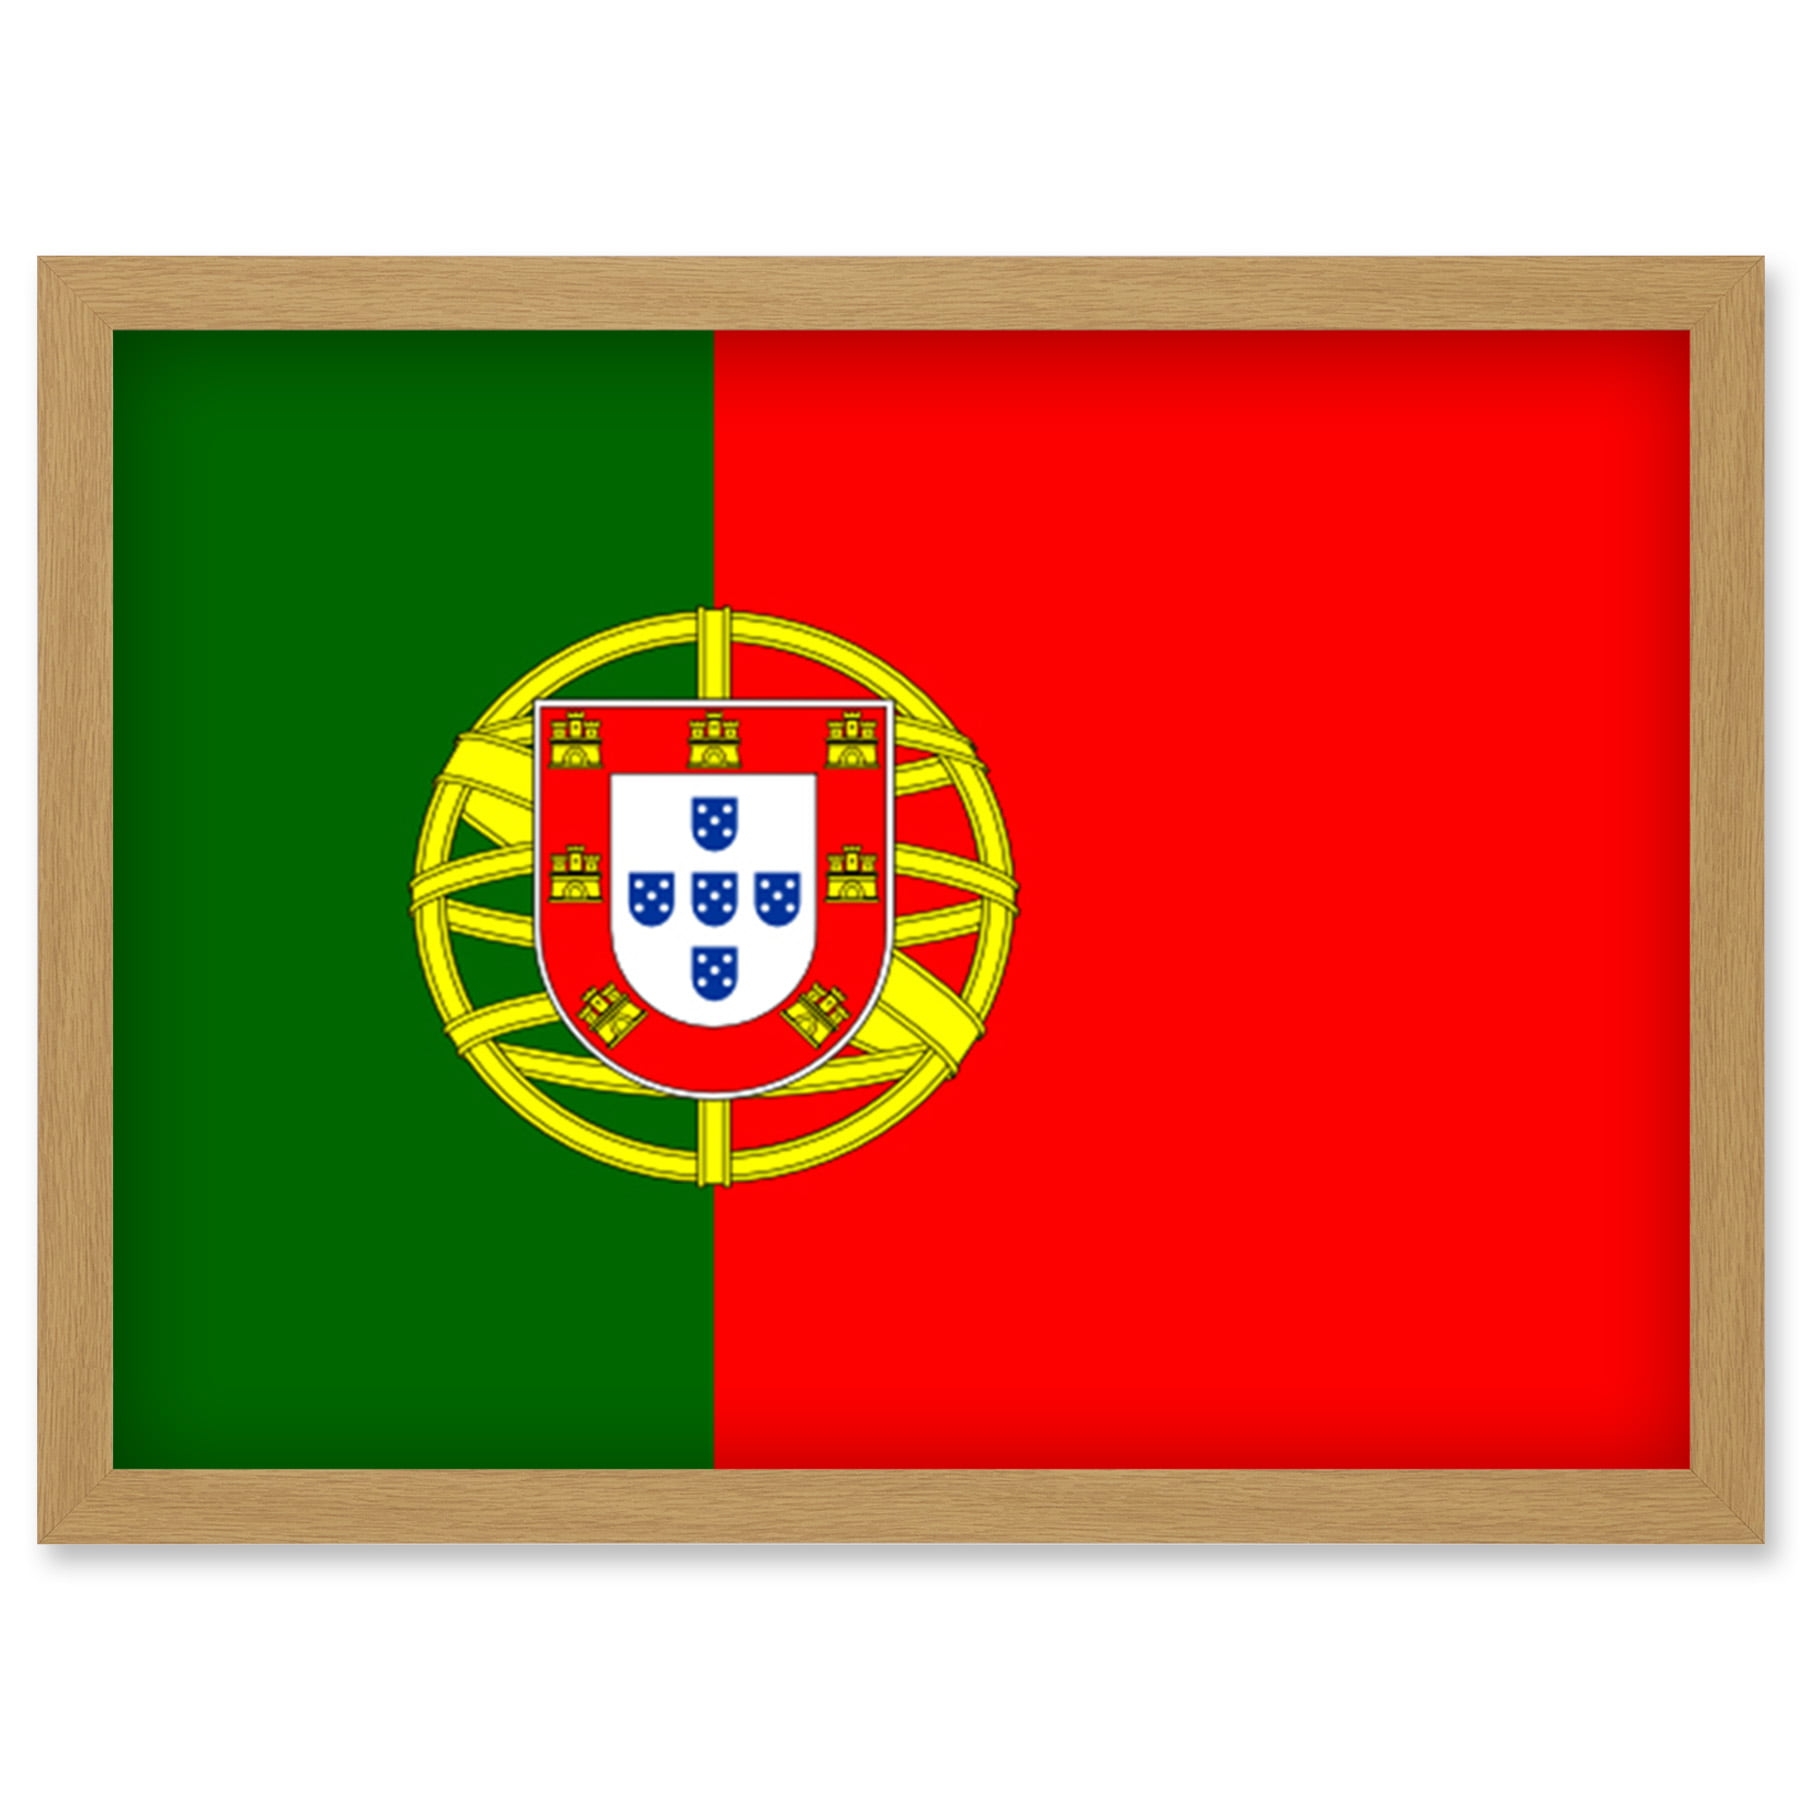 Portugal National Flag Patriotic Vexillology World Flags Country Region Poster Artwork Framed Wall Art Print A4 Walmart